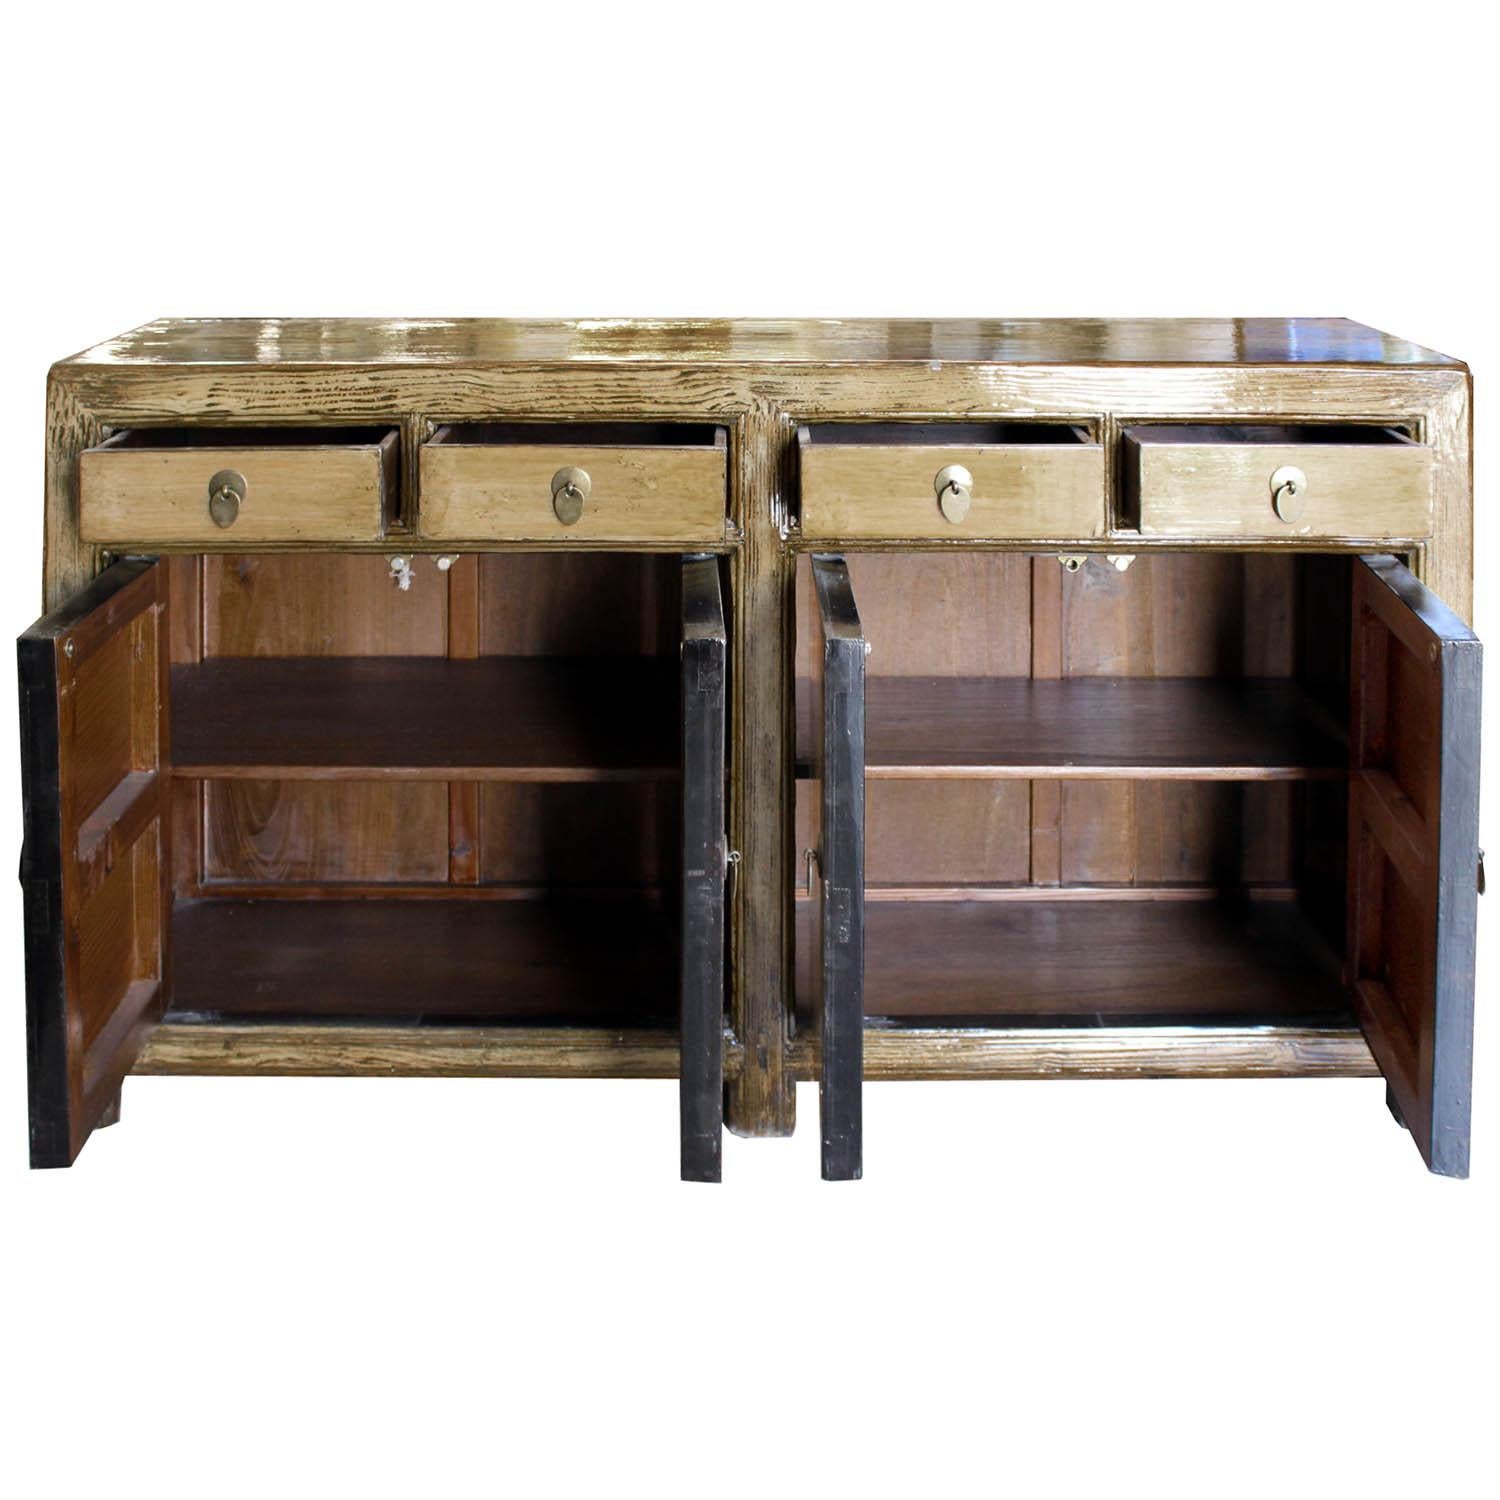 Four-drawer sideboard with elegant hand-painted parchment lacquer color could sit behind a sofa or be used as a server in a dining room. New interior shelves and hardware.